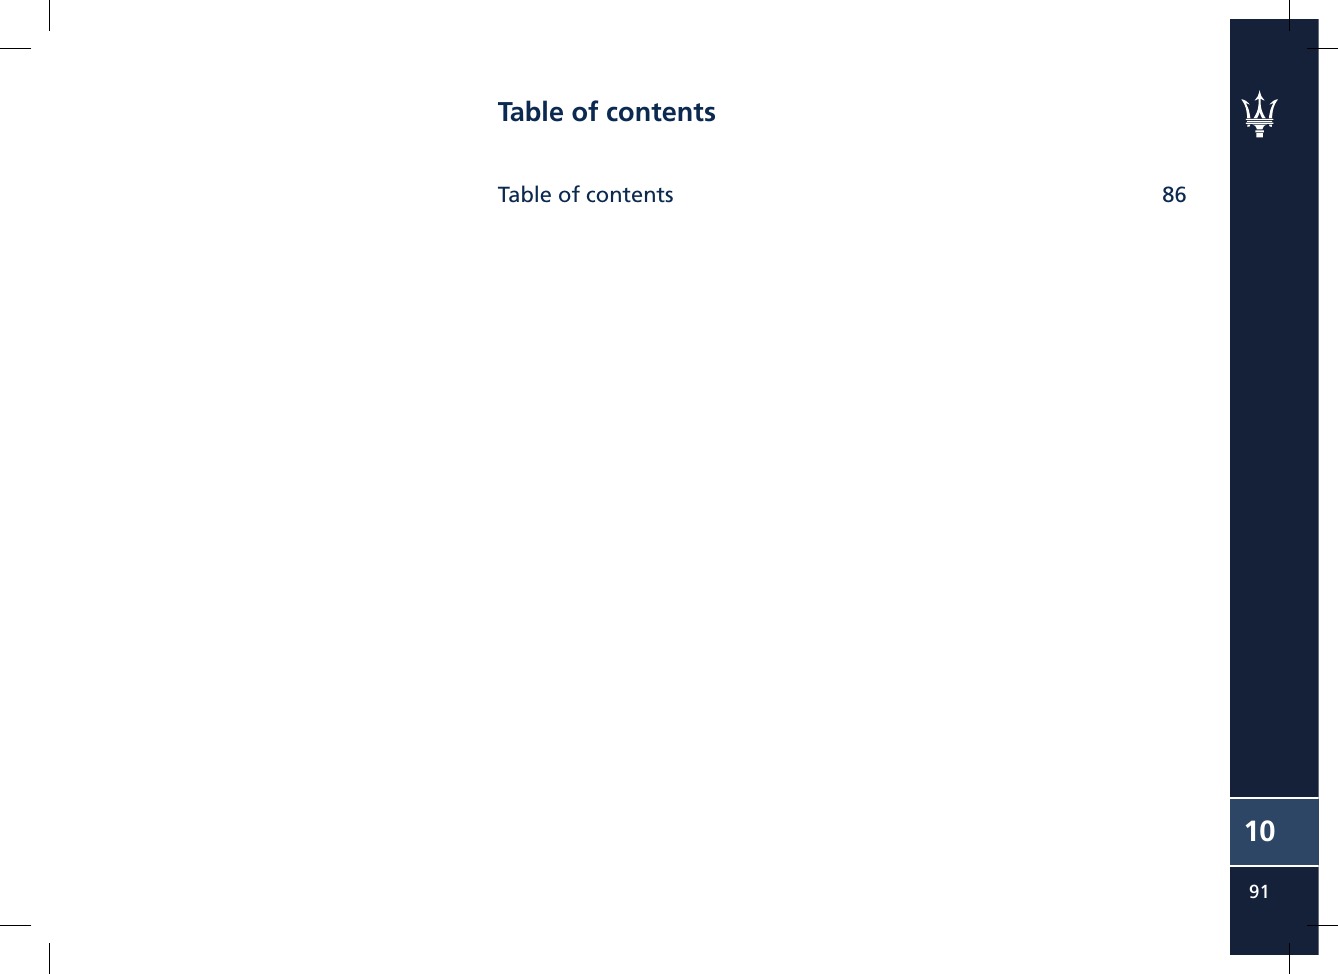 1091Table of contentsTable of contents  86